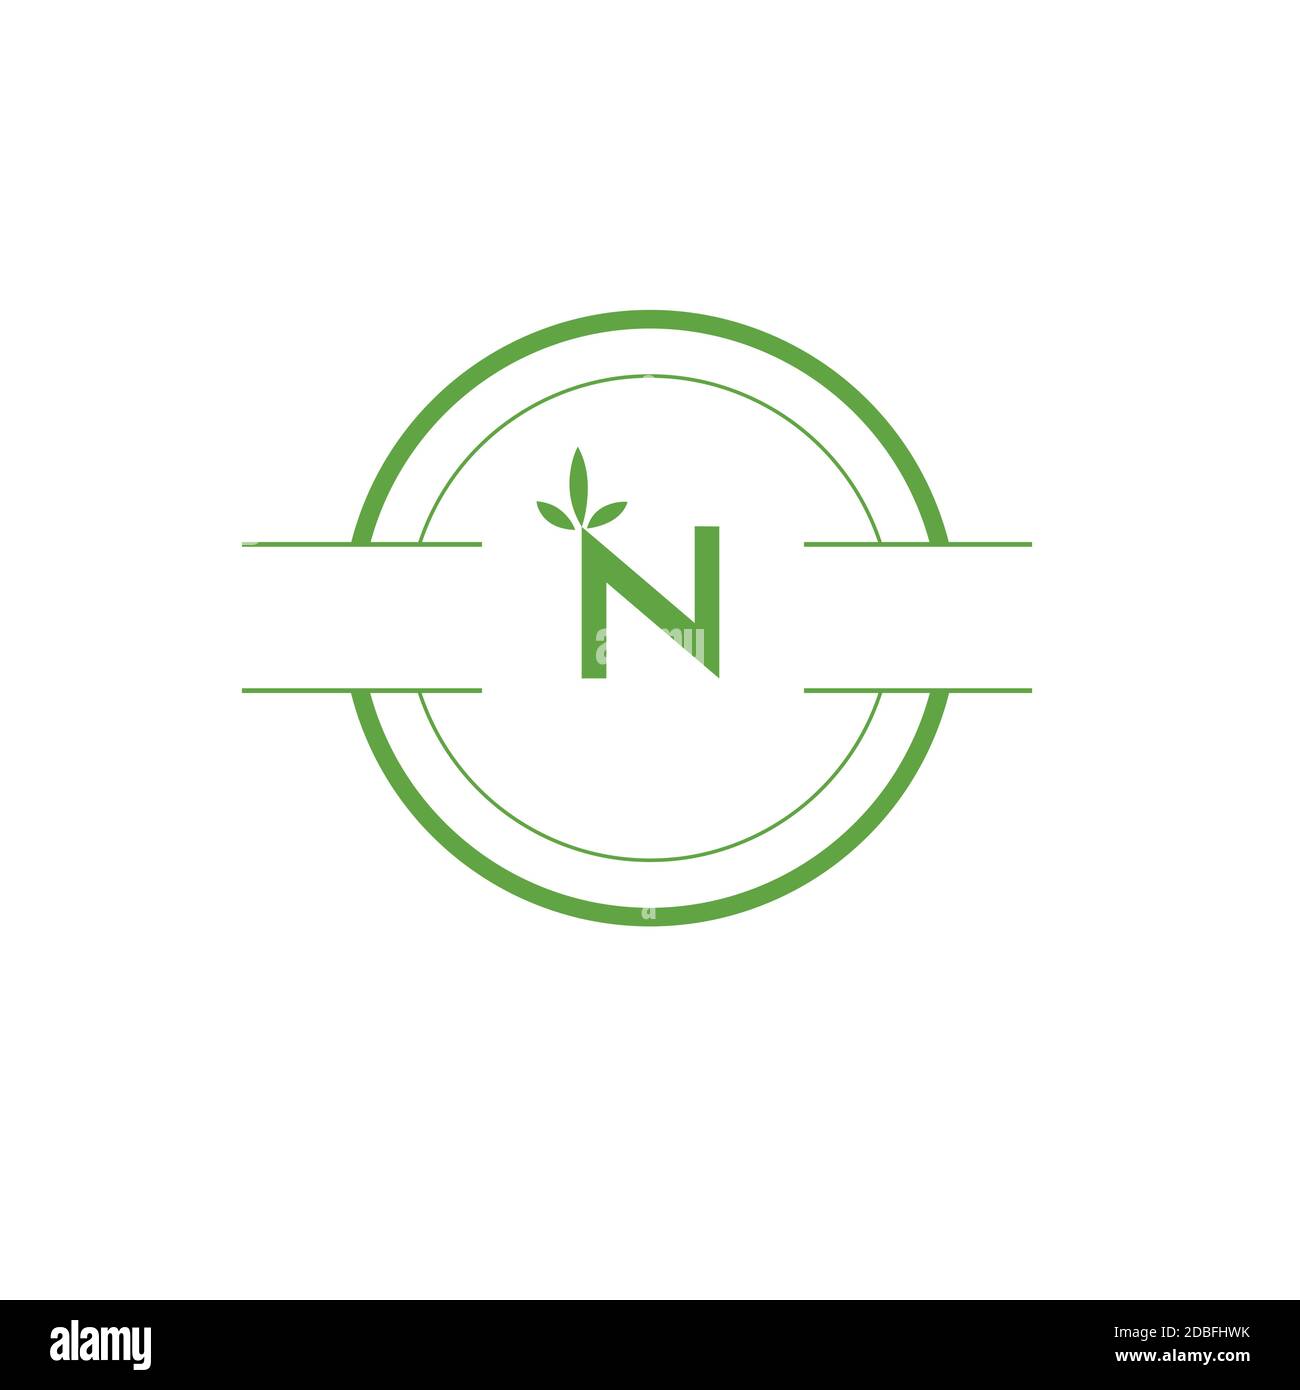 N nature logo ecology green life health care. Stock Vector